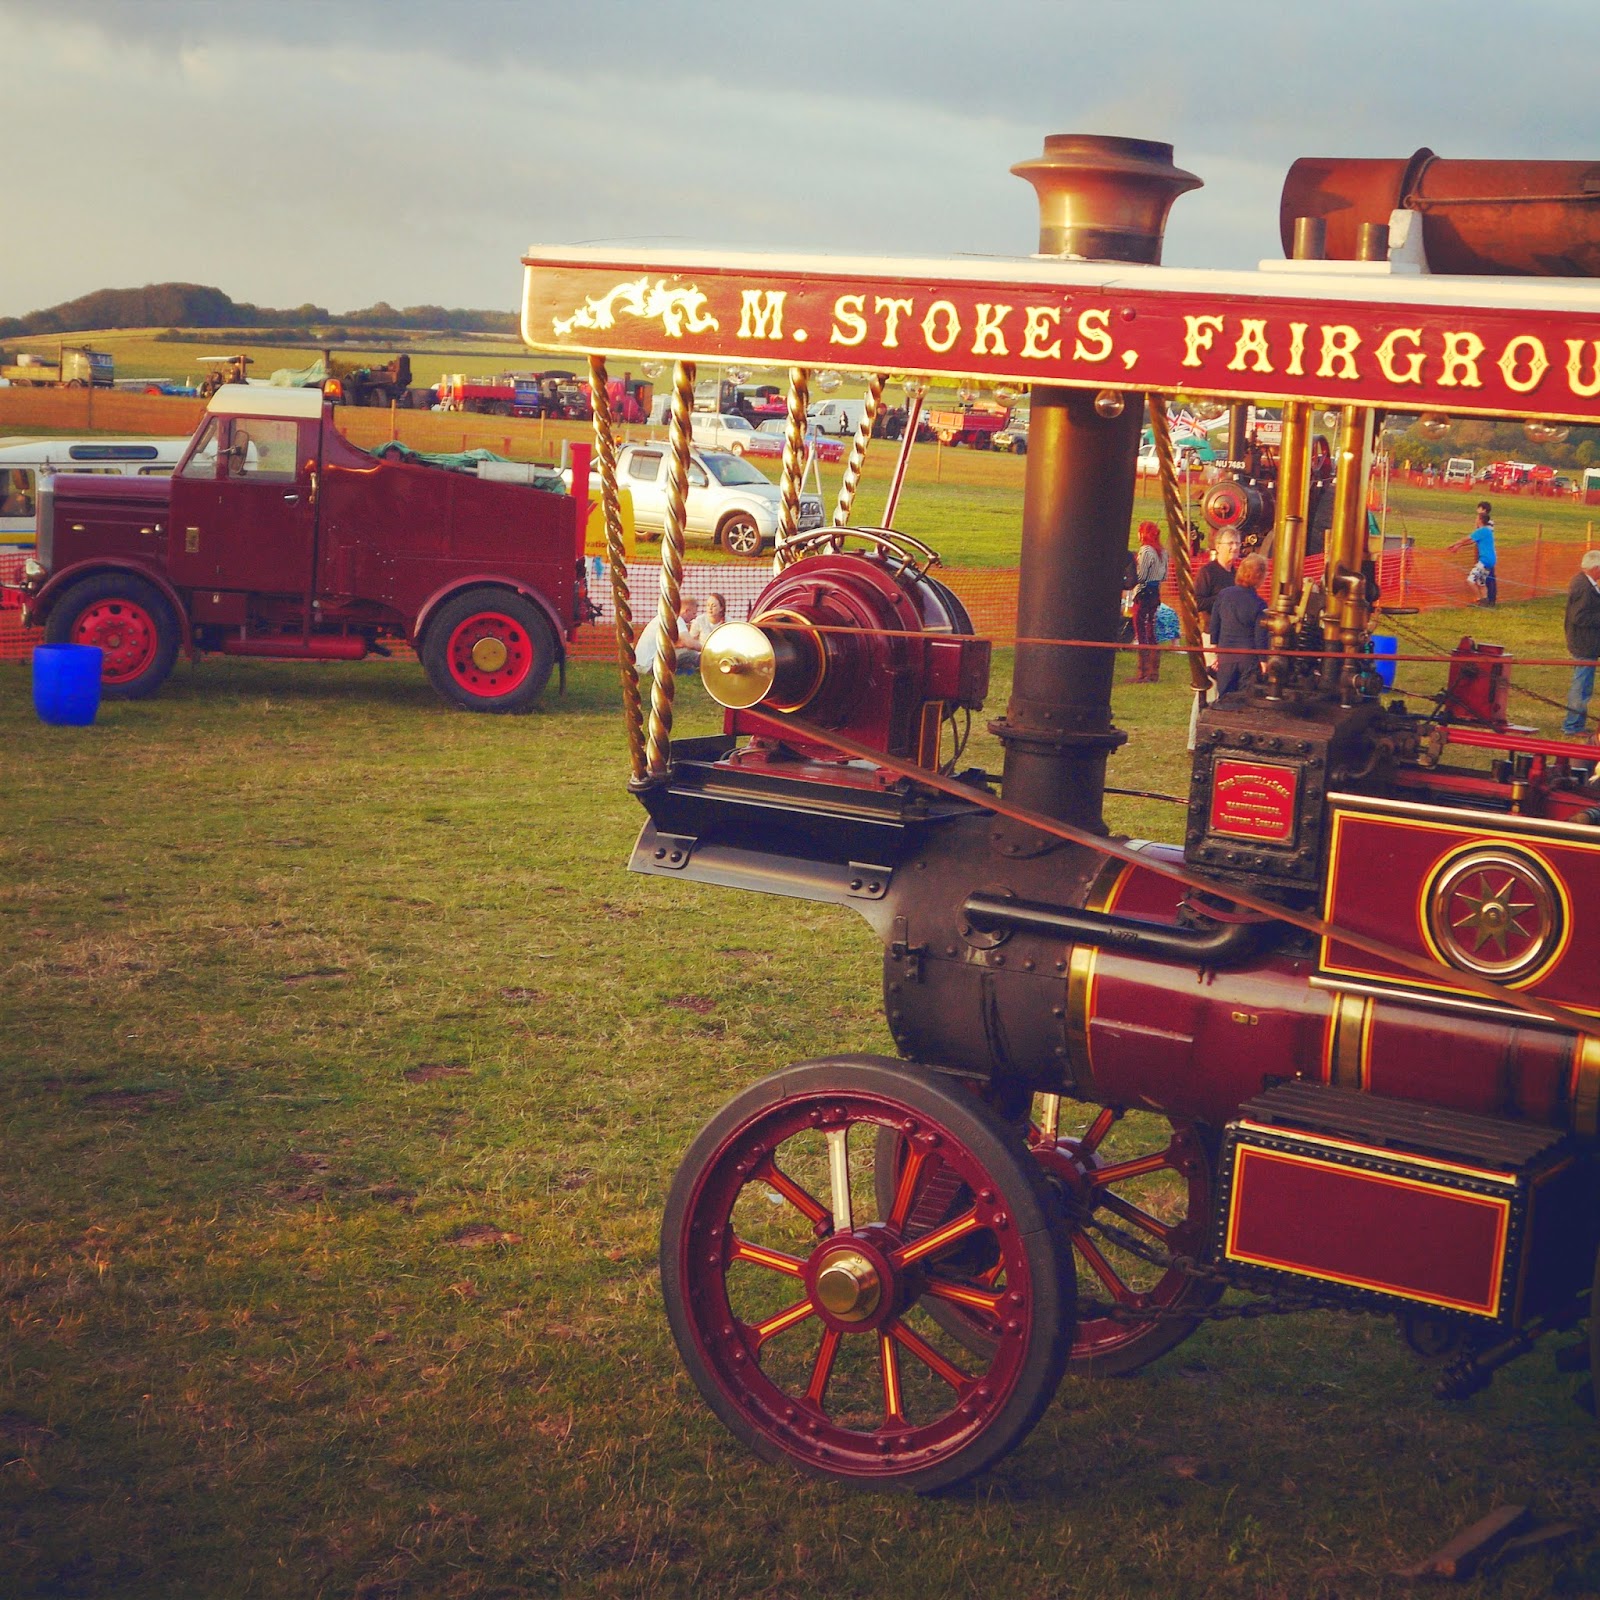 Sunset over the steam rally